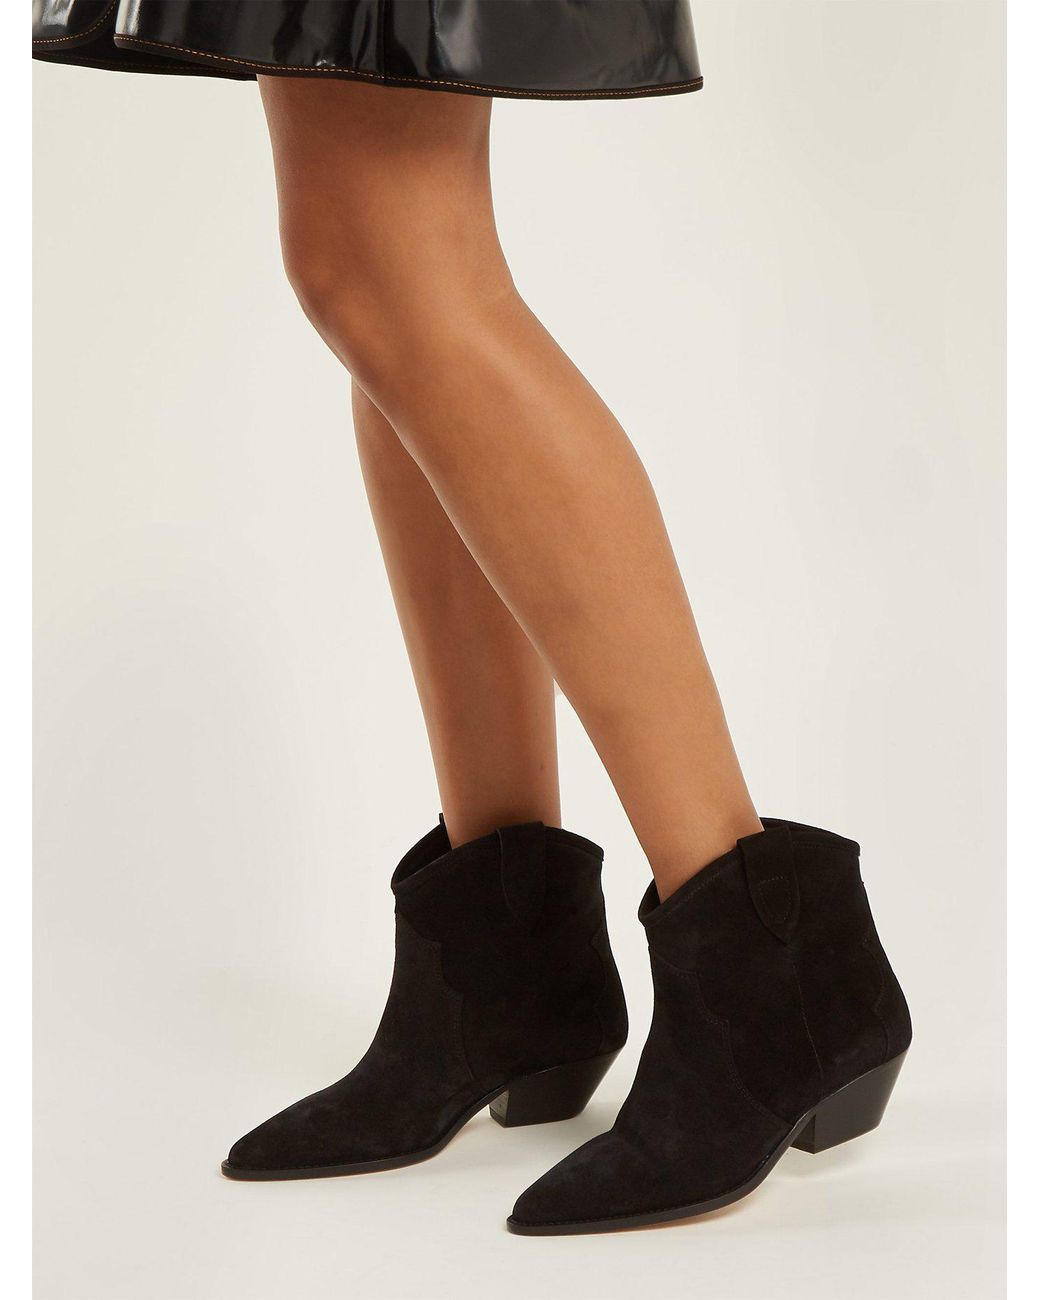 Isabel Marant Dewina Western Suede Ankle Boots in Black | Lyst